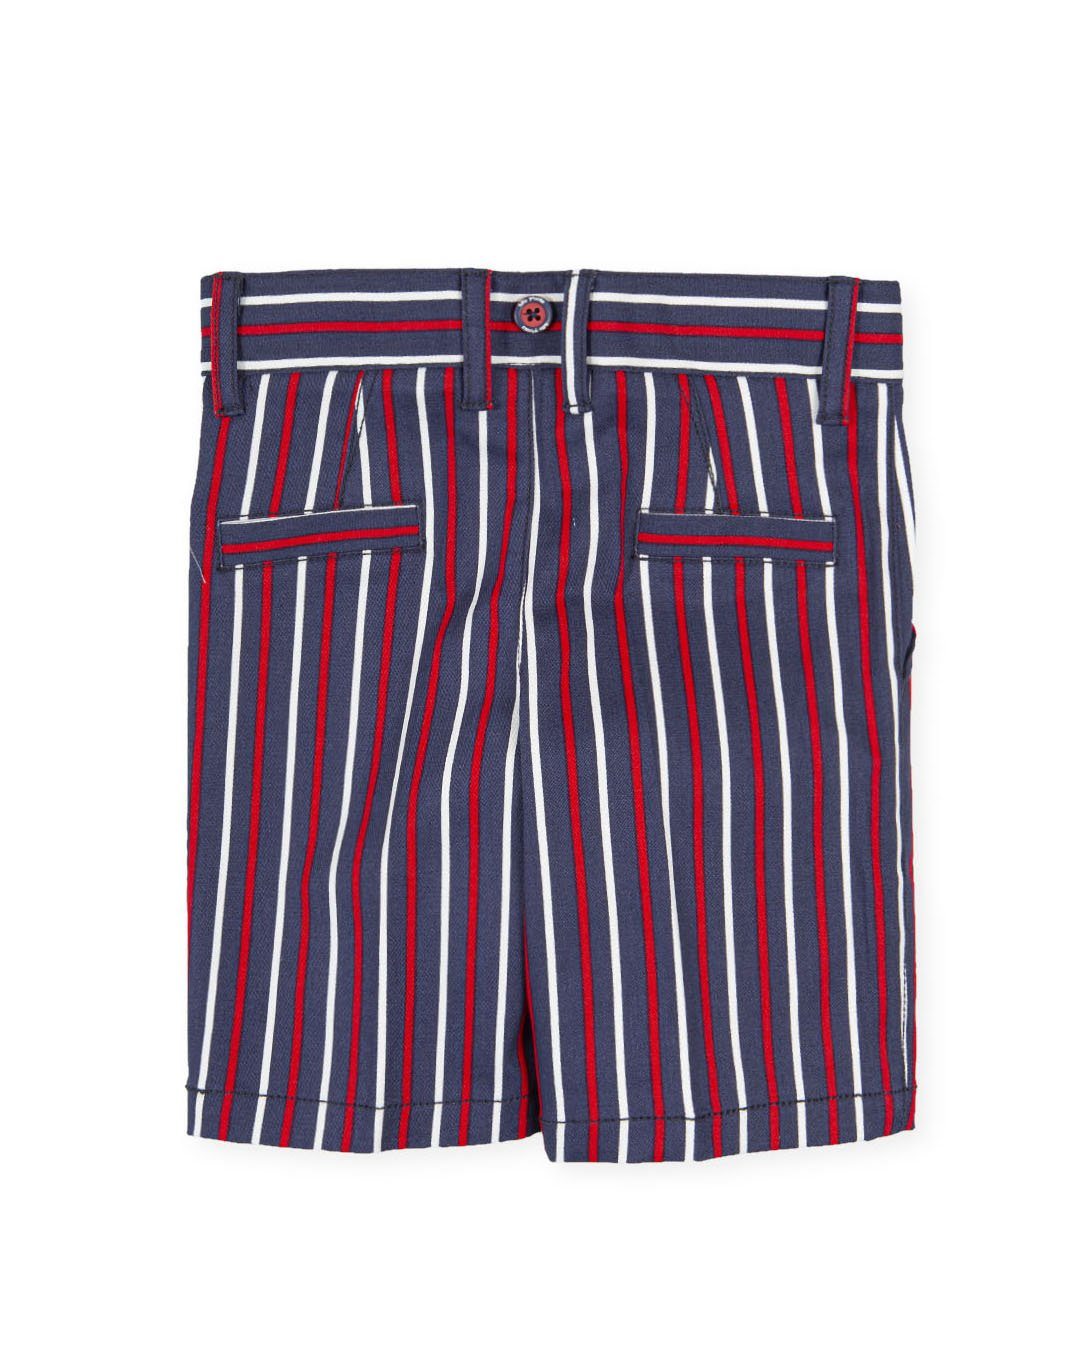 Tutto Piccolo "David" Shirt & Navy & Red Striped Shorts | Millie and John